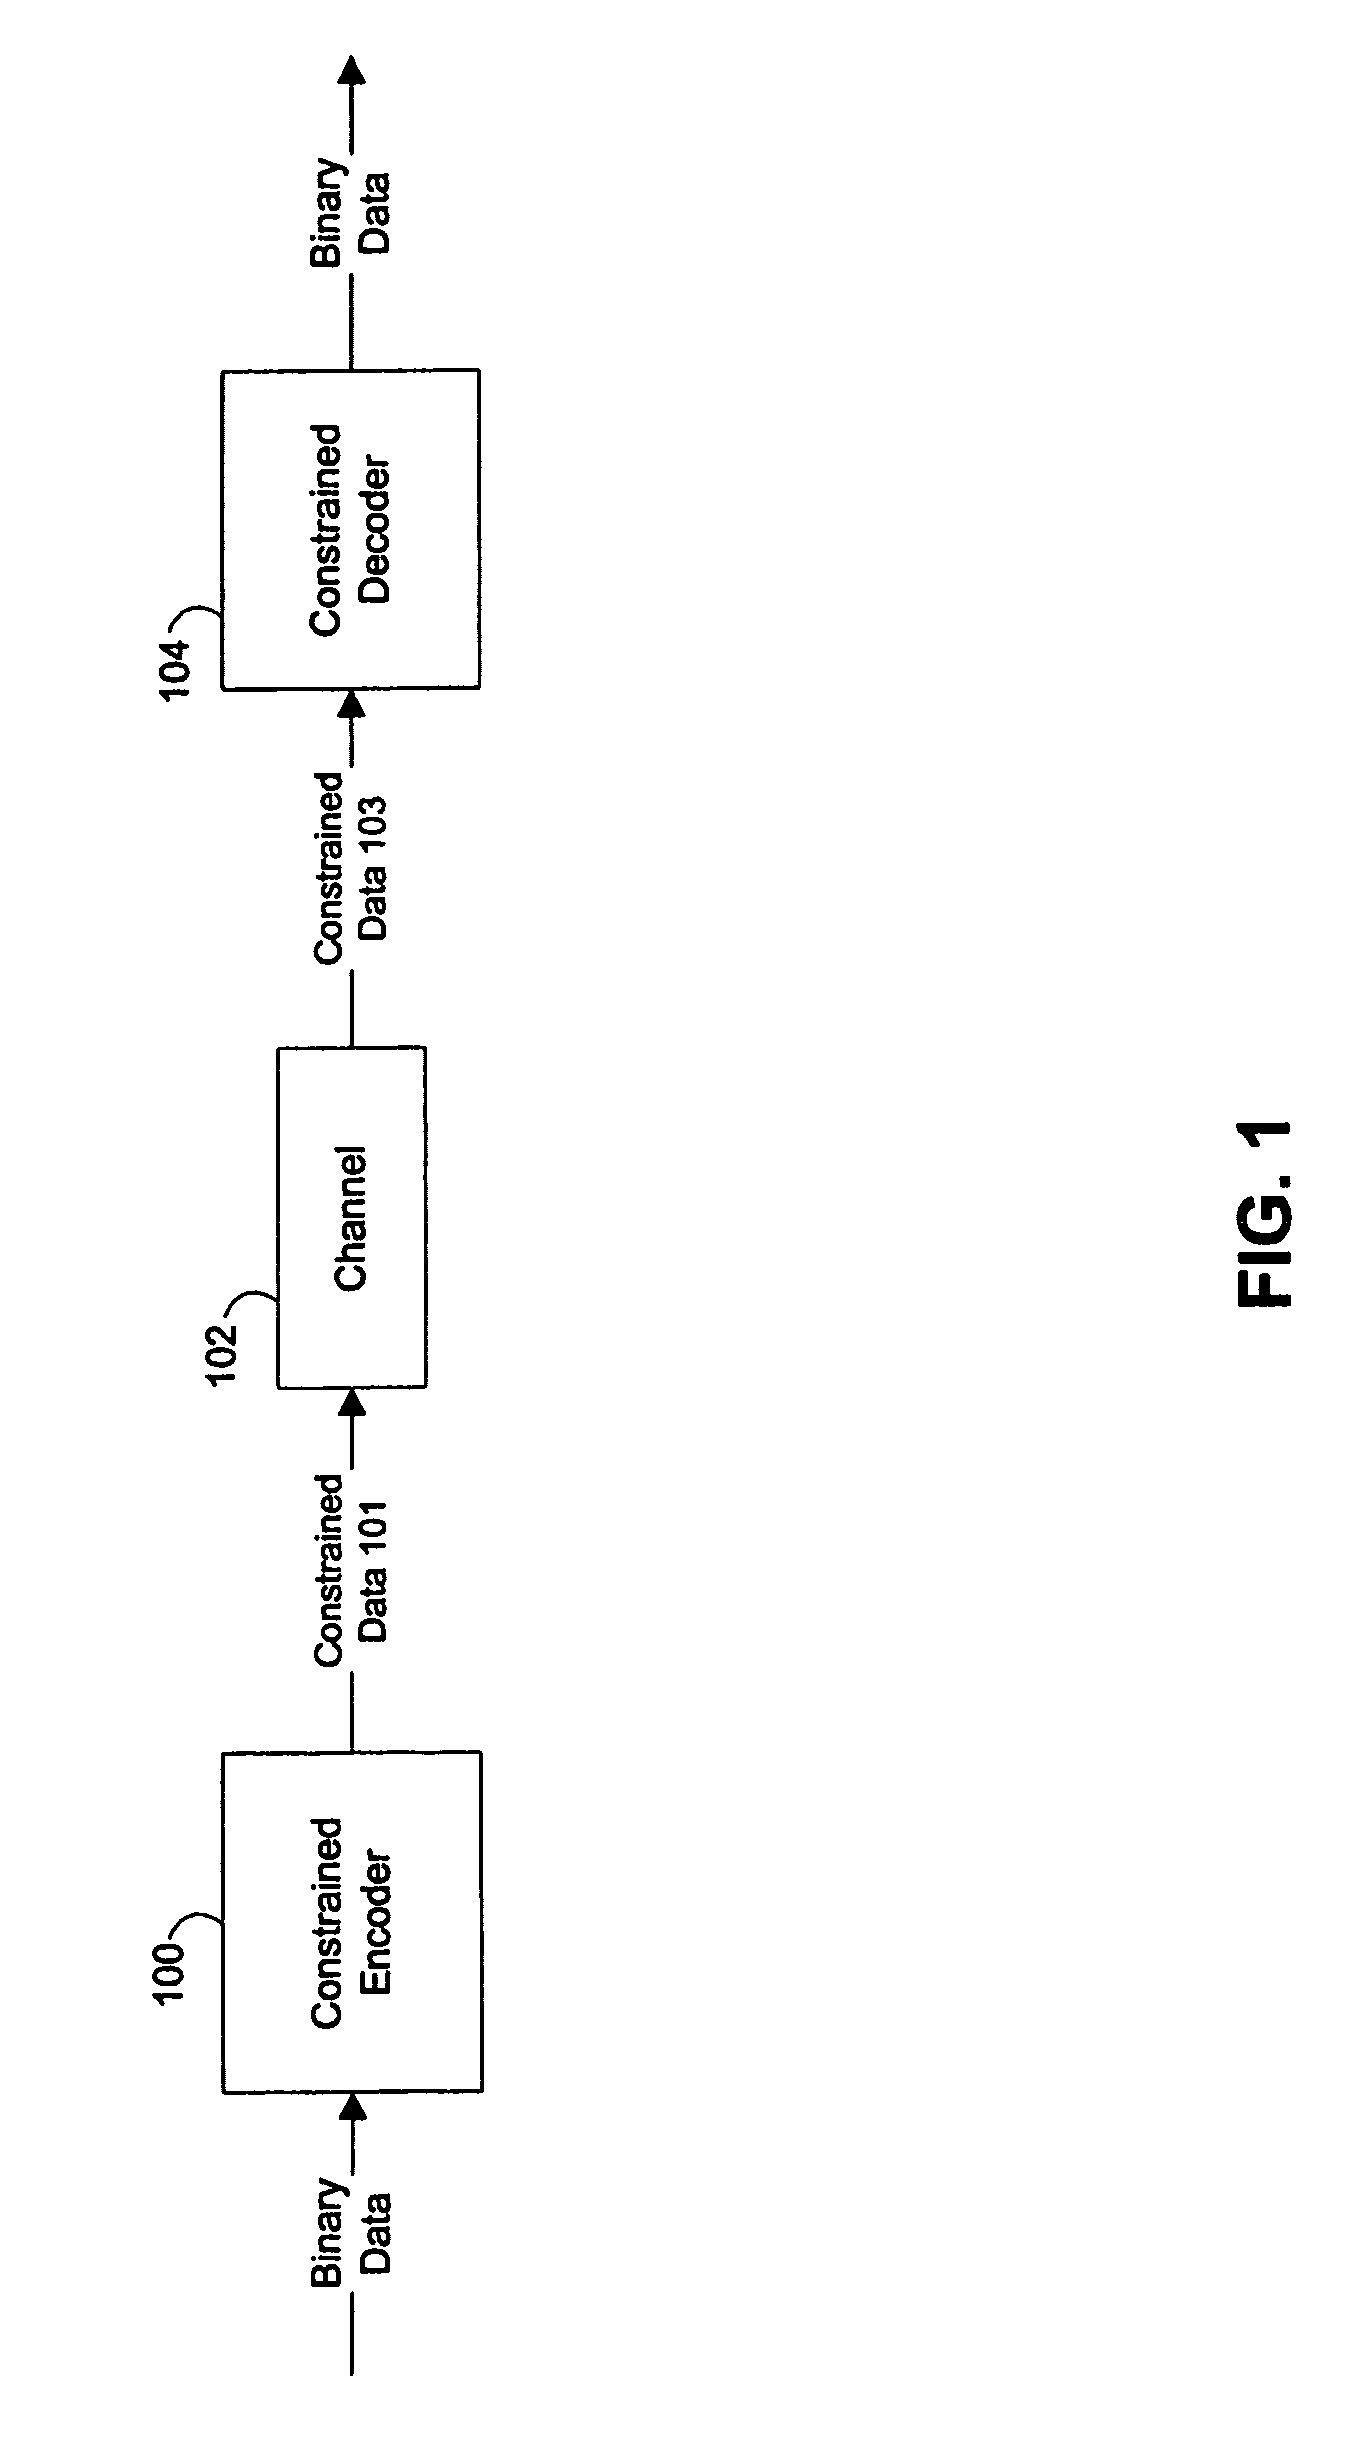 Systems and methods for constructing high-rate constrained codes